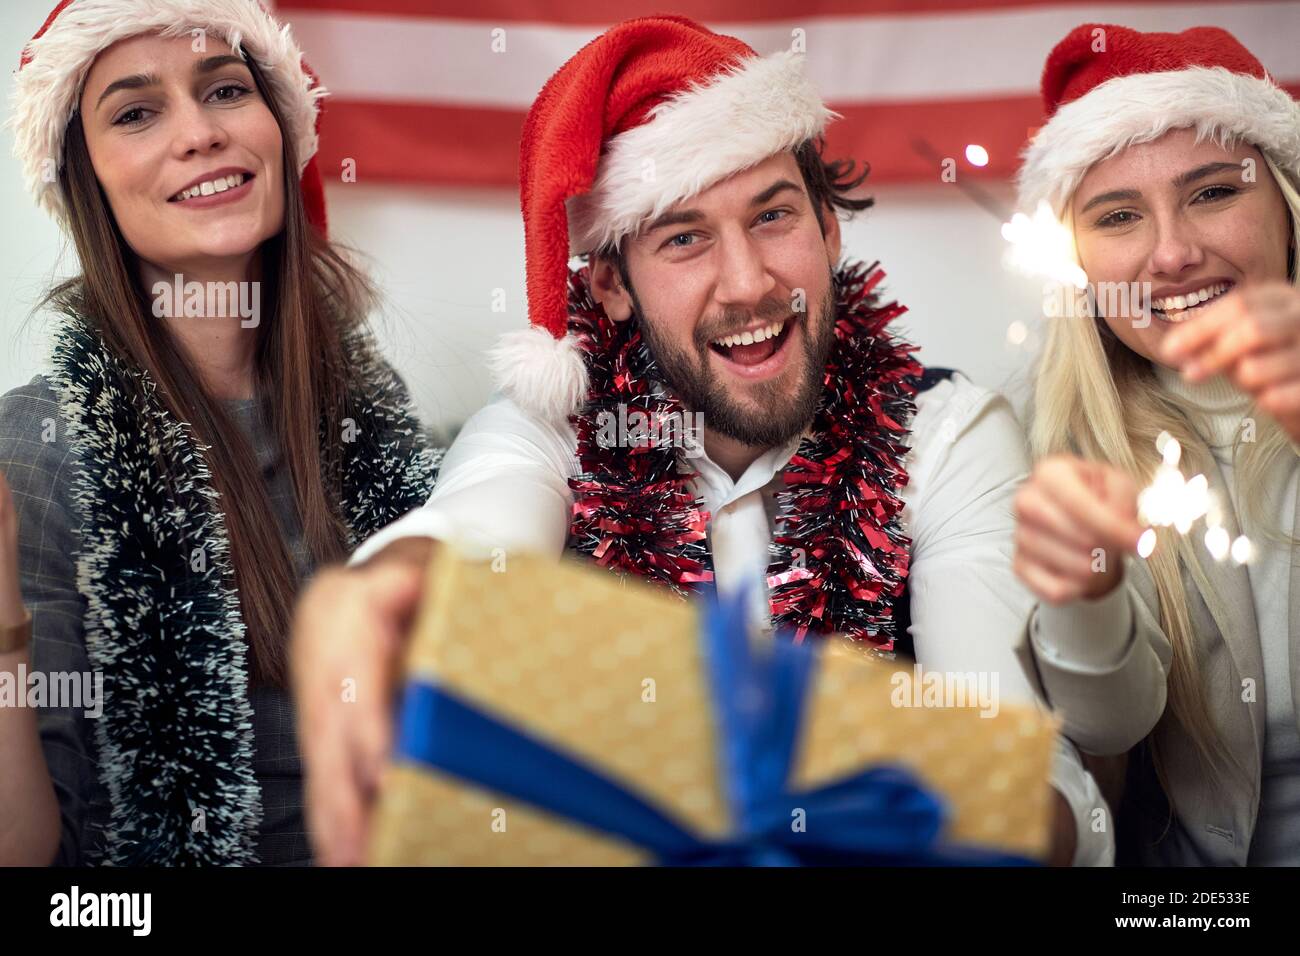 A group of cheerful friends celebrating Christmas with presents and sprinklers at a home party in a holiday atmosphere. Christmas, friendship, togethe Stock Photo